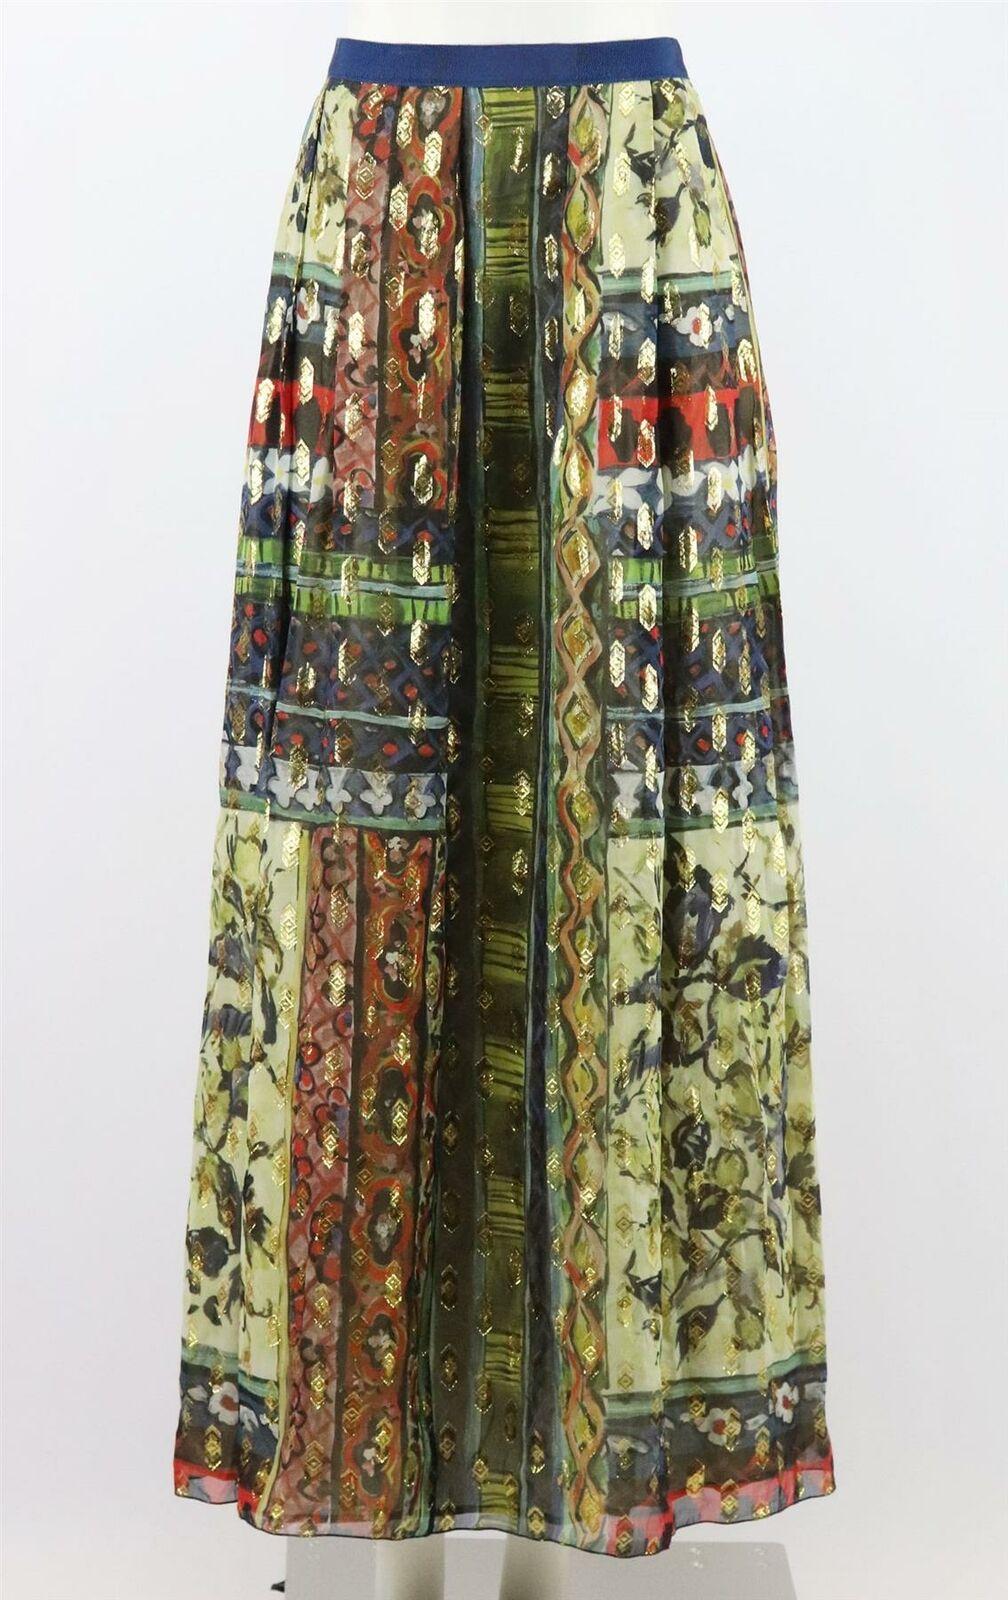 This pleated maxi skirt by Alberta Ferretti has been made for a bold and boho-luxe look, it's cut from breezy silk-chiffon and printed with a geometric design and finished with gold detail throughout.
Multicoloured silk-chiffon.
Concealed hook and